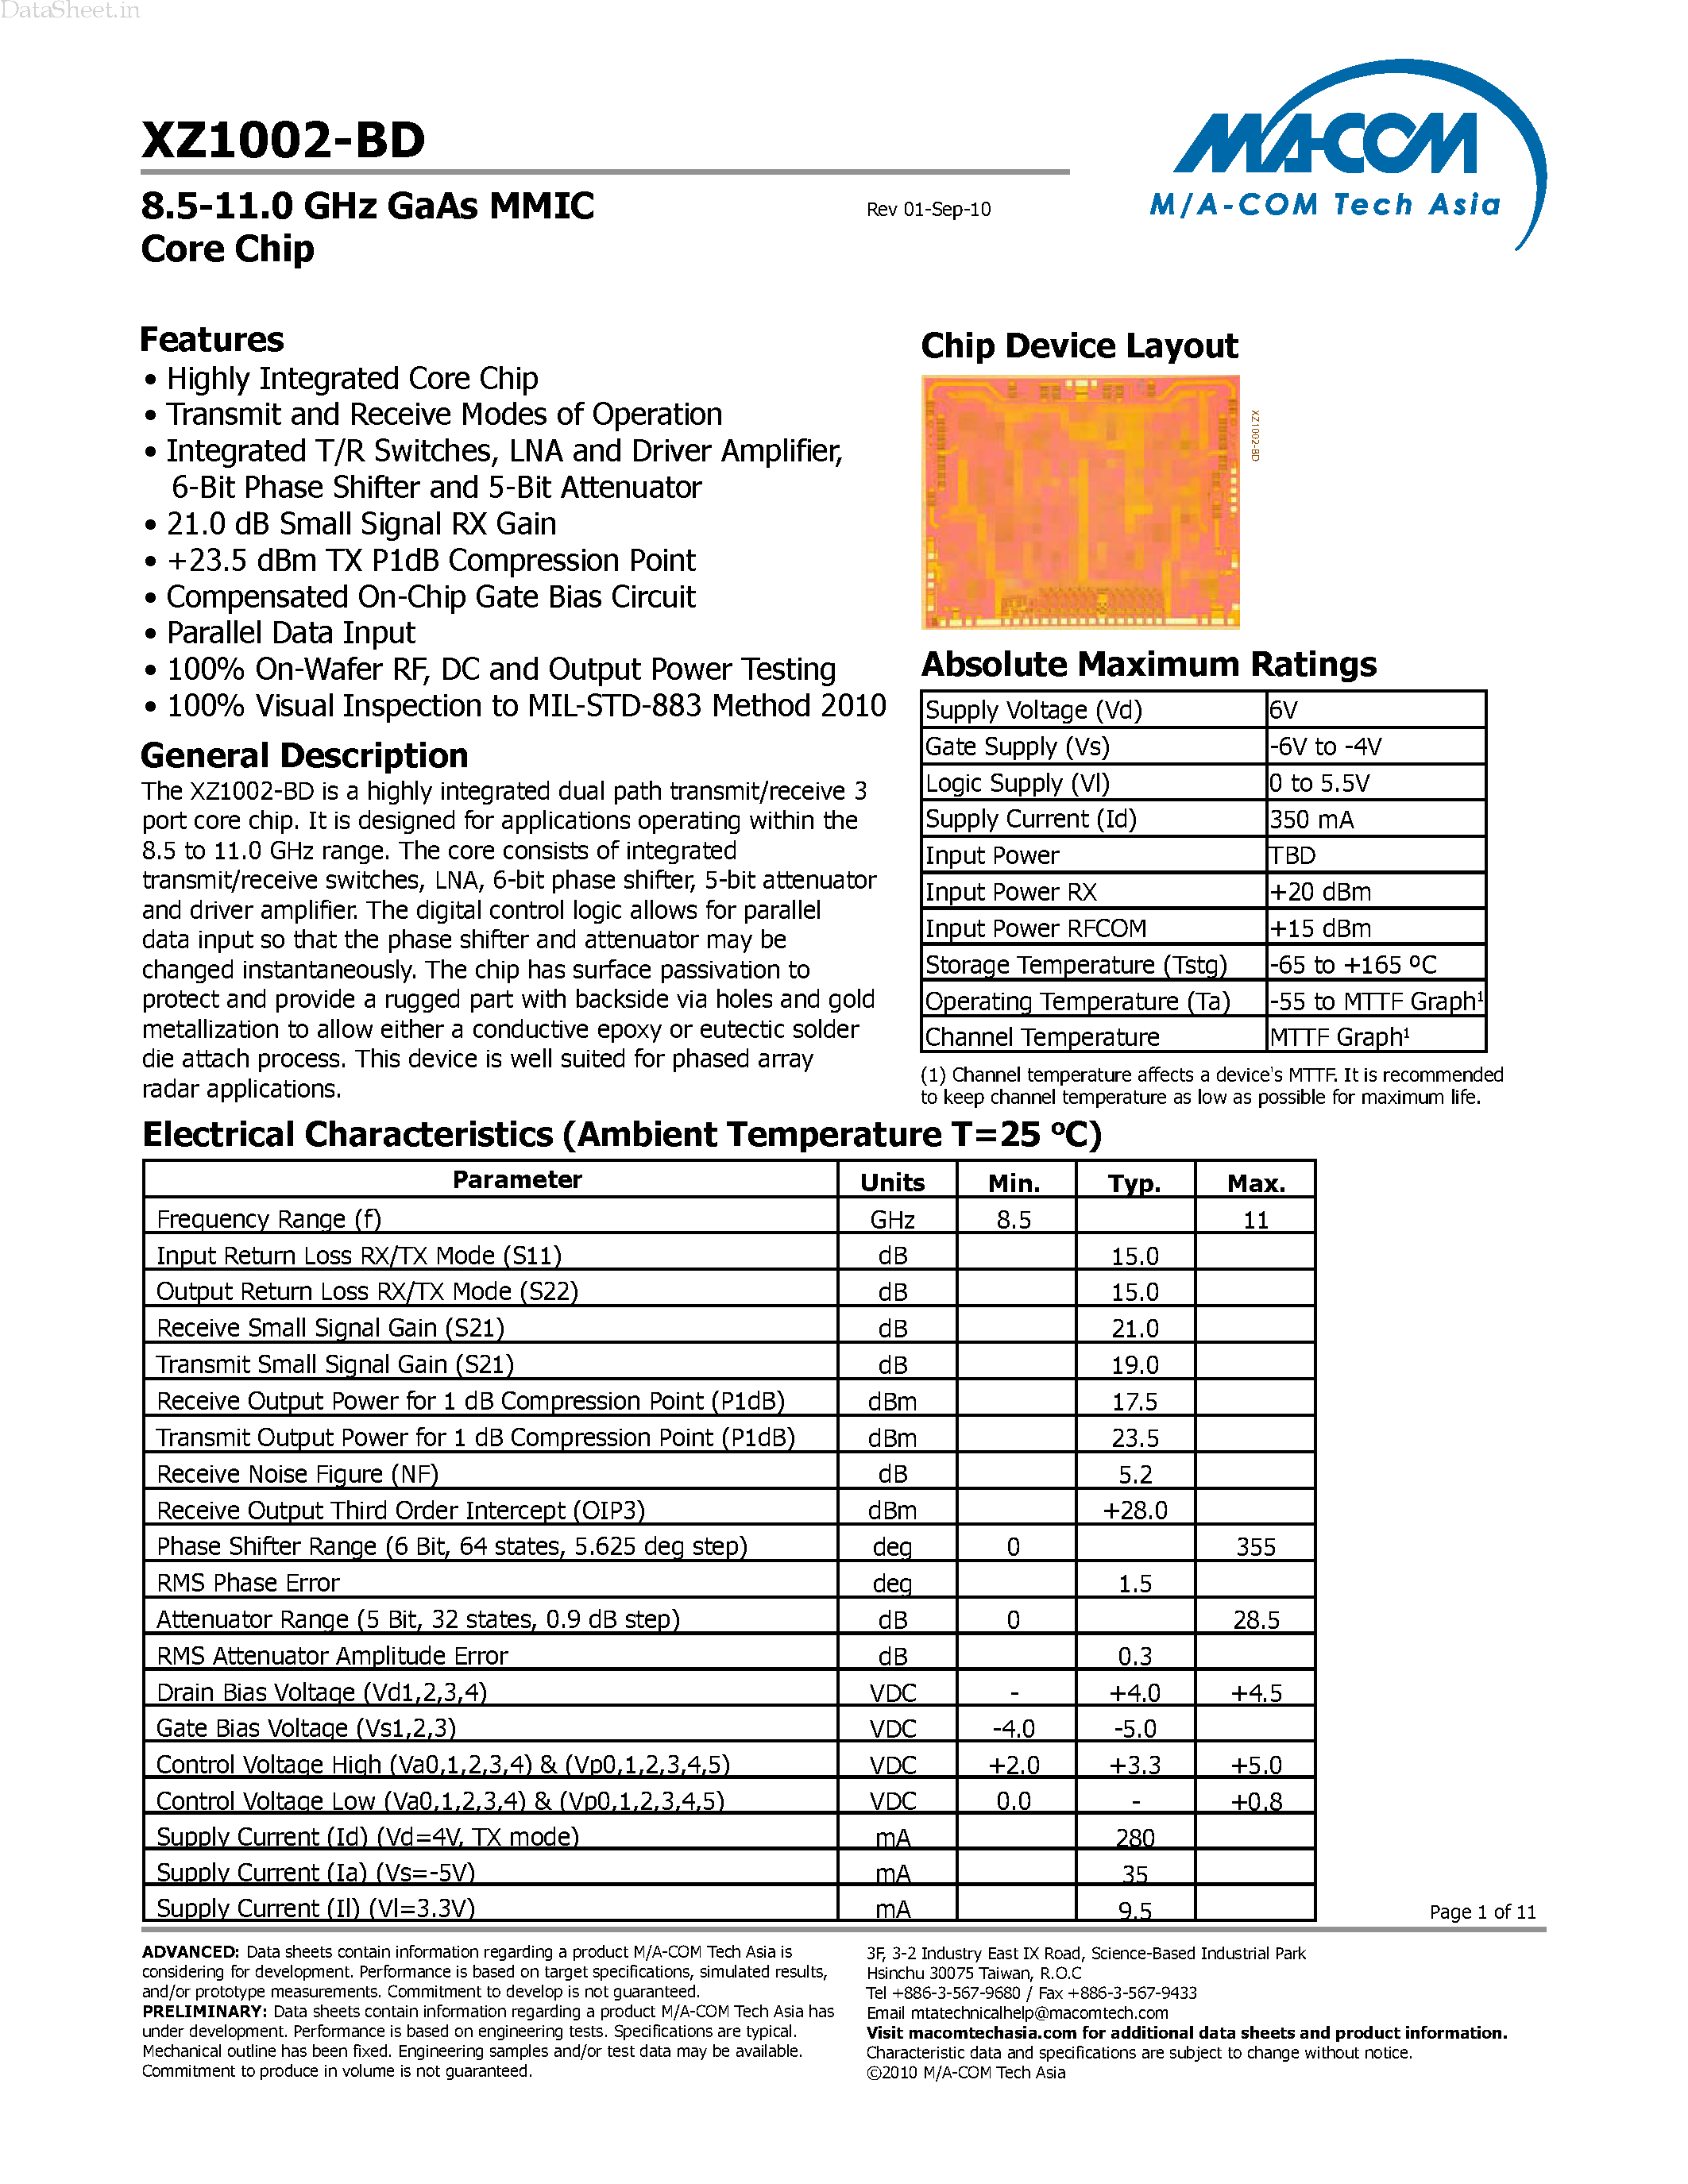 Datasheet XZ1002-BD - highly integrated dual path transmit/receive 3 port core chip page 1